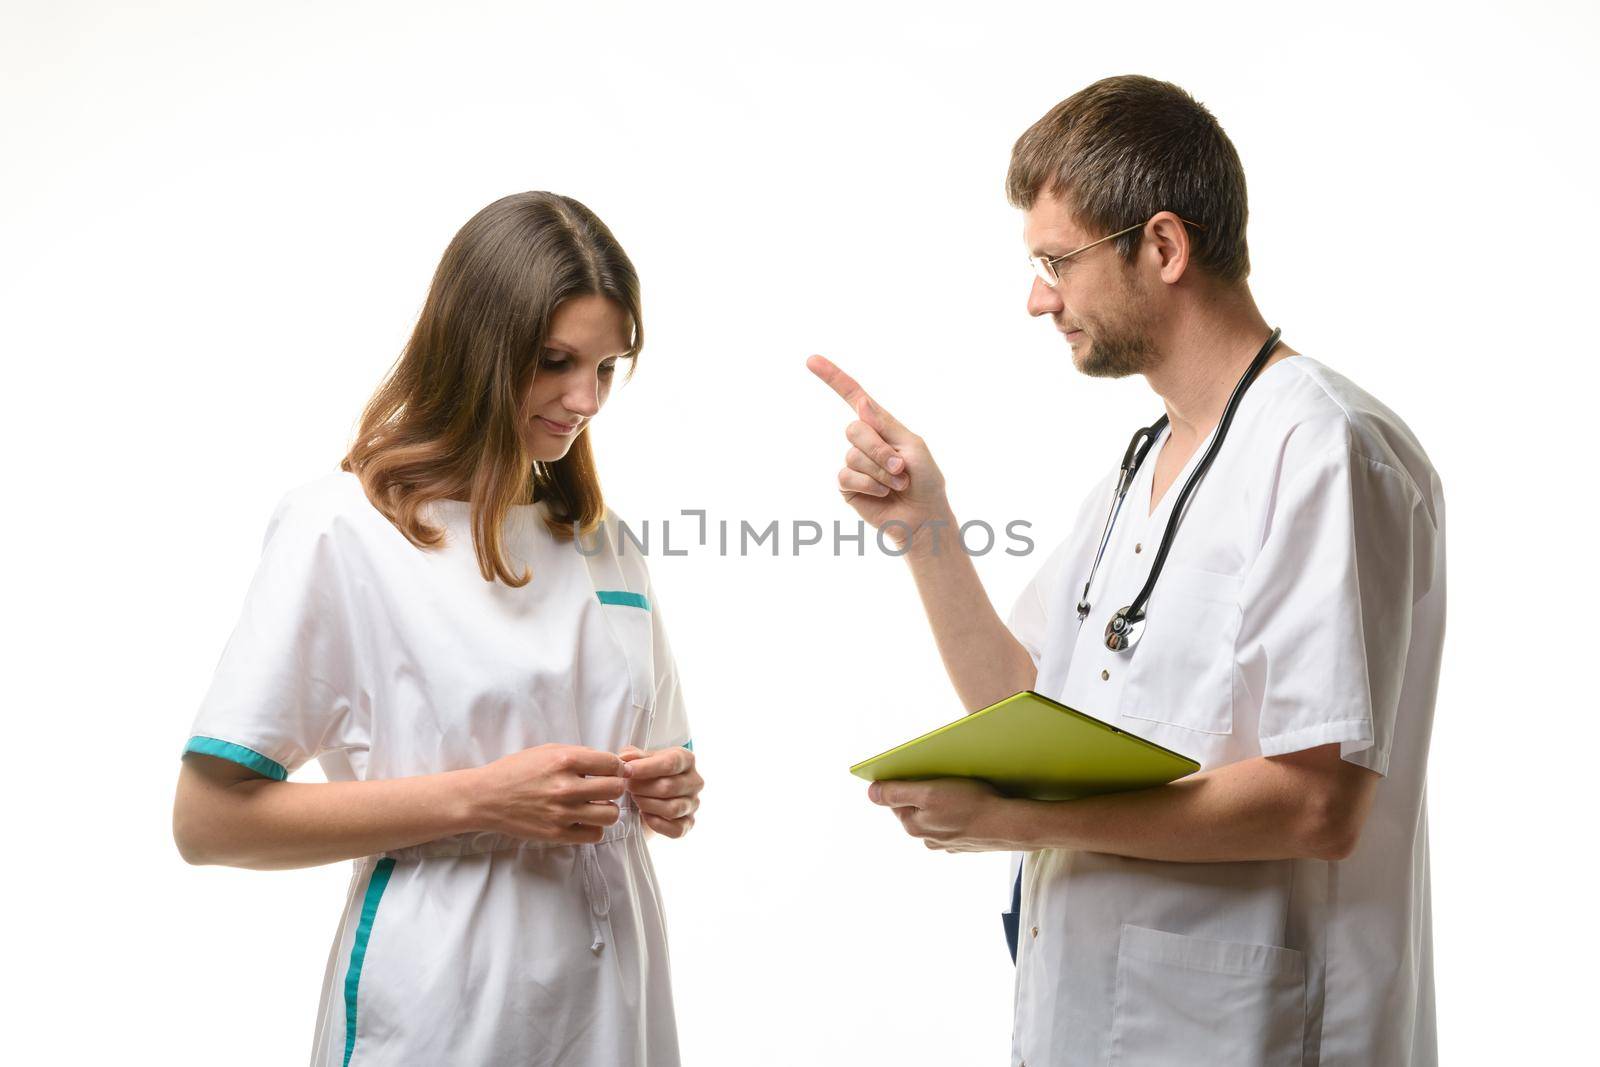 Doctor scolds intern for poor learning outcomes